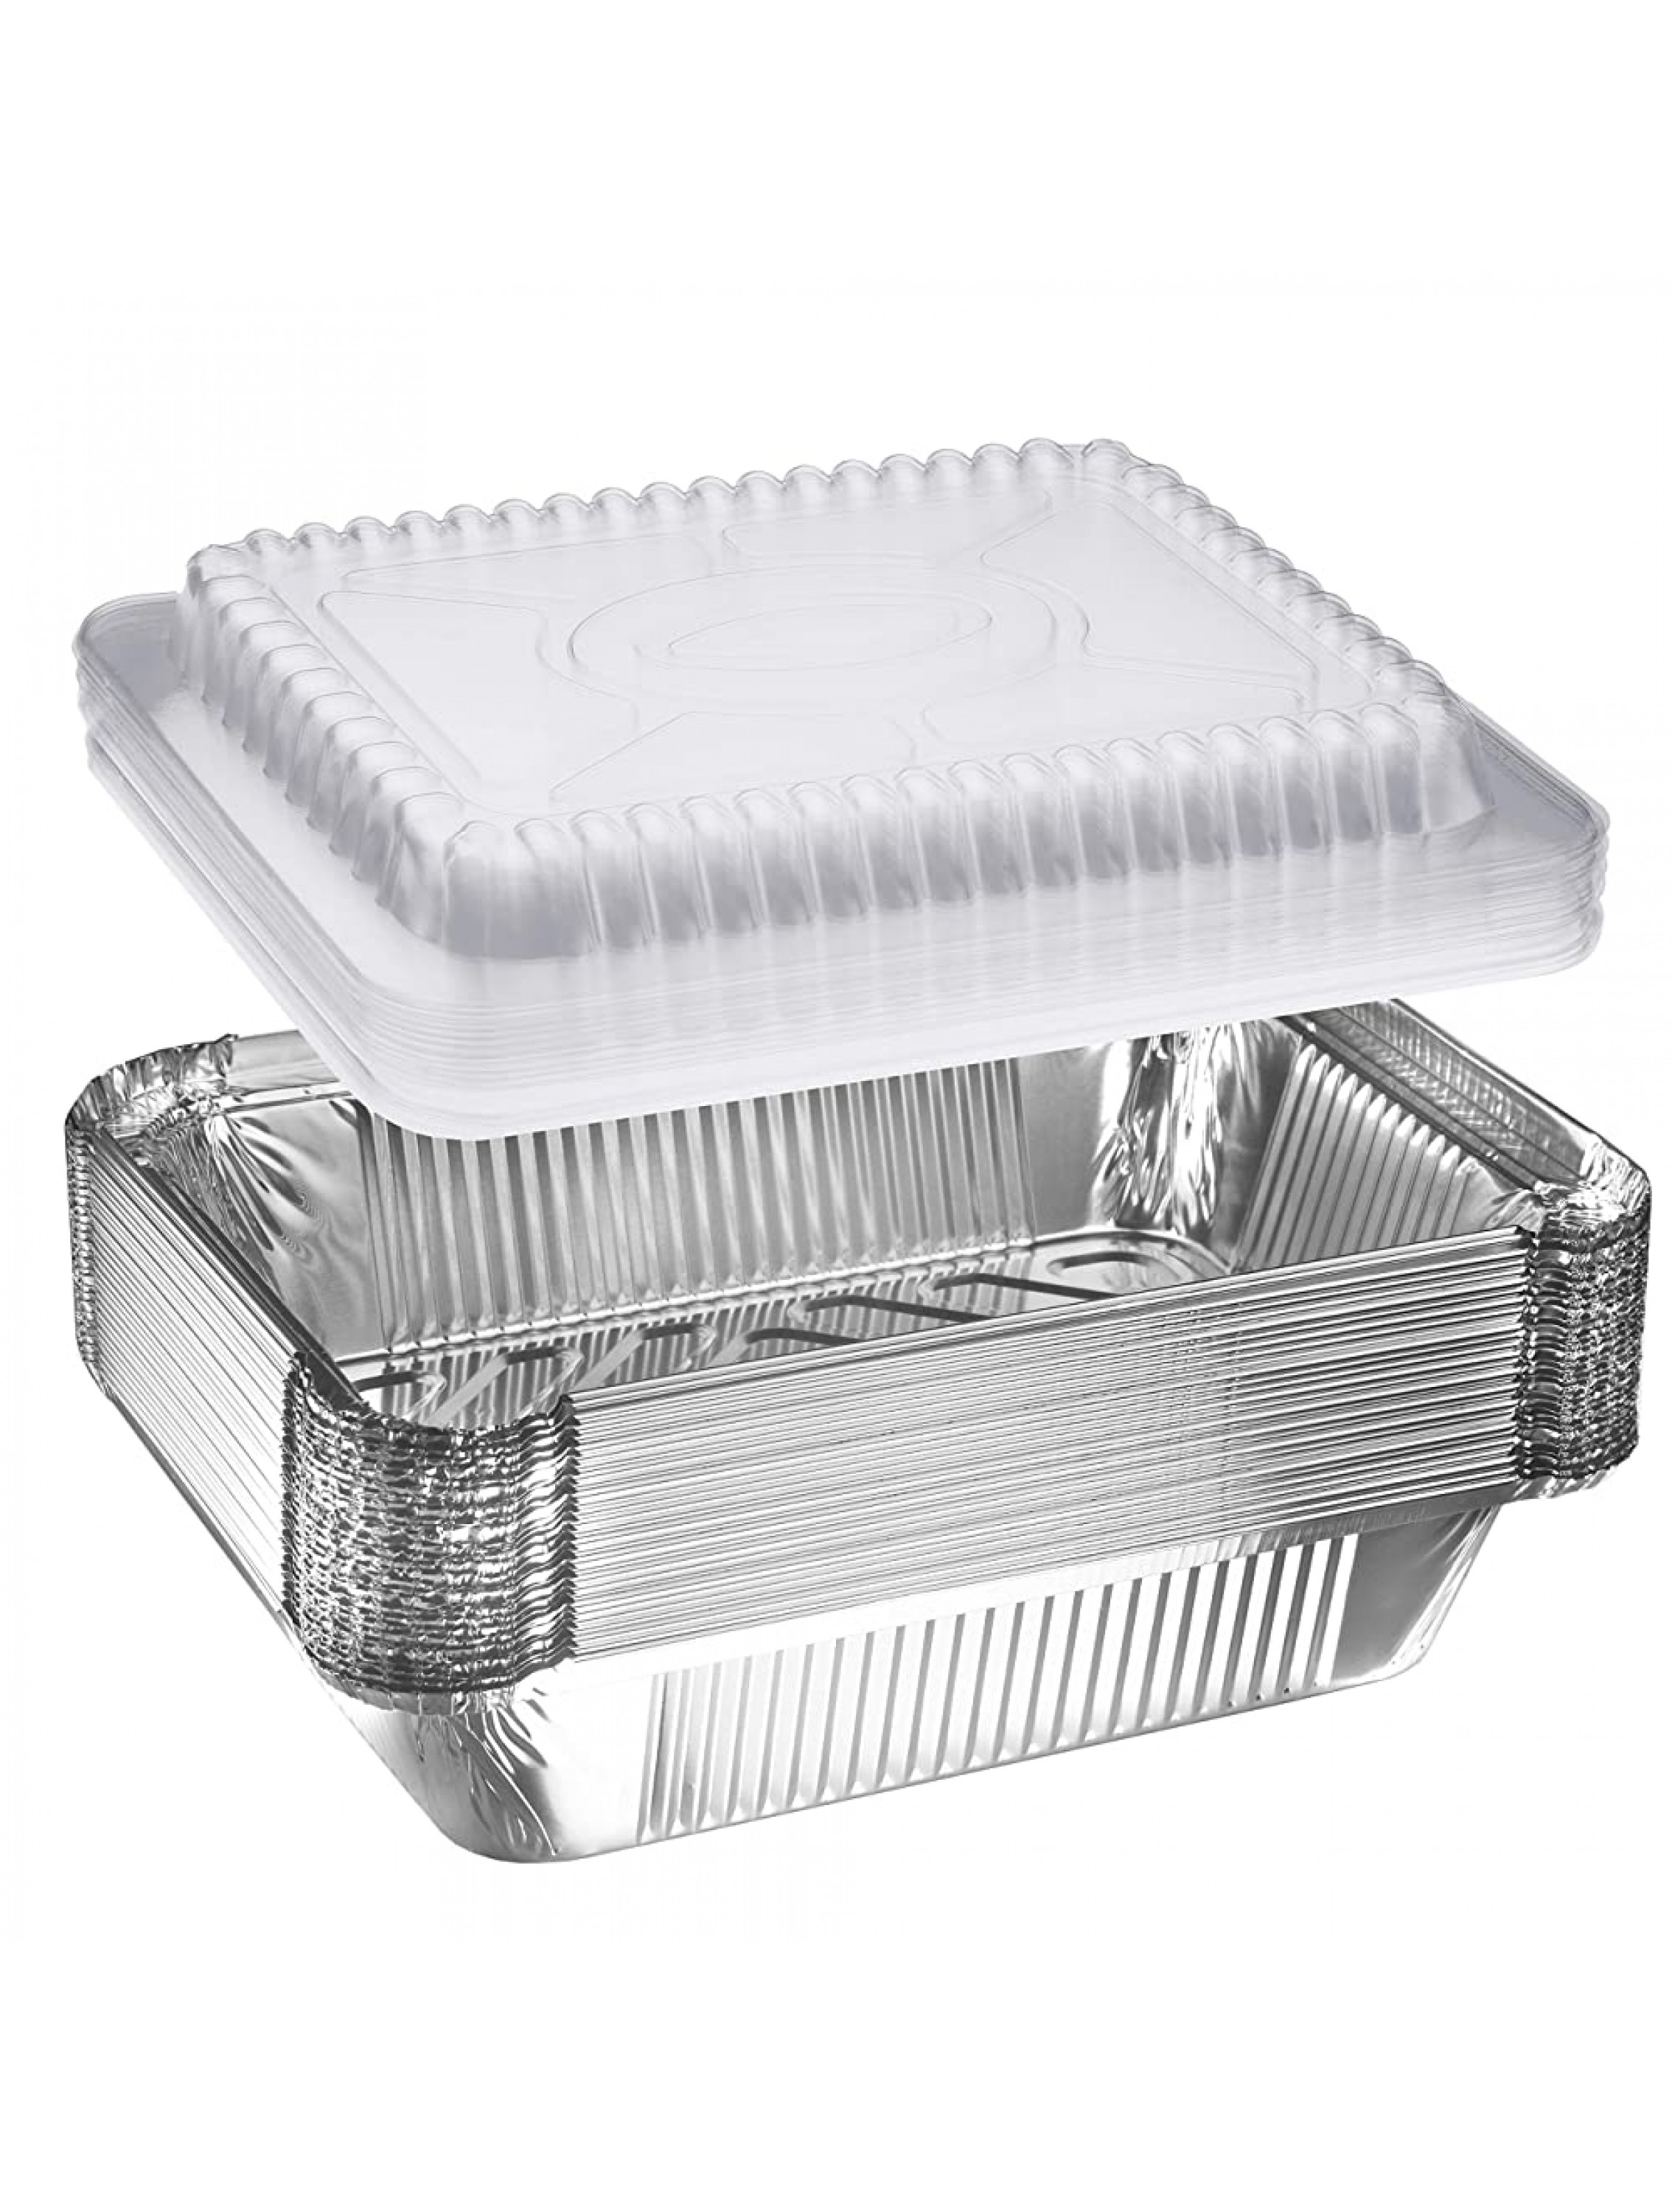 NYHI 30-Pack Heavy Duty Disposable Aluminum Oblong Foil Pans with Plastic Covers Recyclable Tin Food Storage Tray Extra-Sturdy Containers for Cooking Baking Meal Prep Takeout 8.4 x 5.9 2.25lb - BZN0HJ991